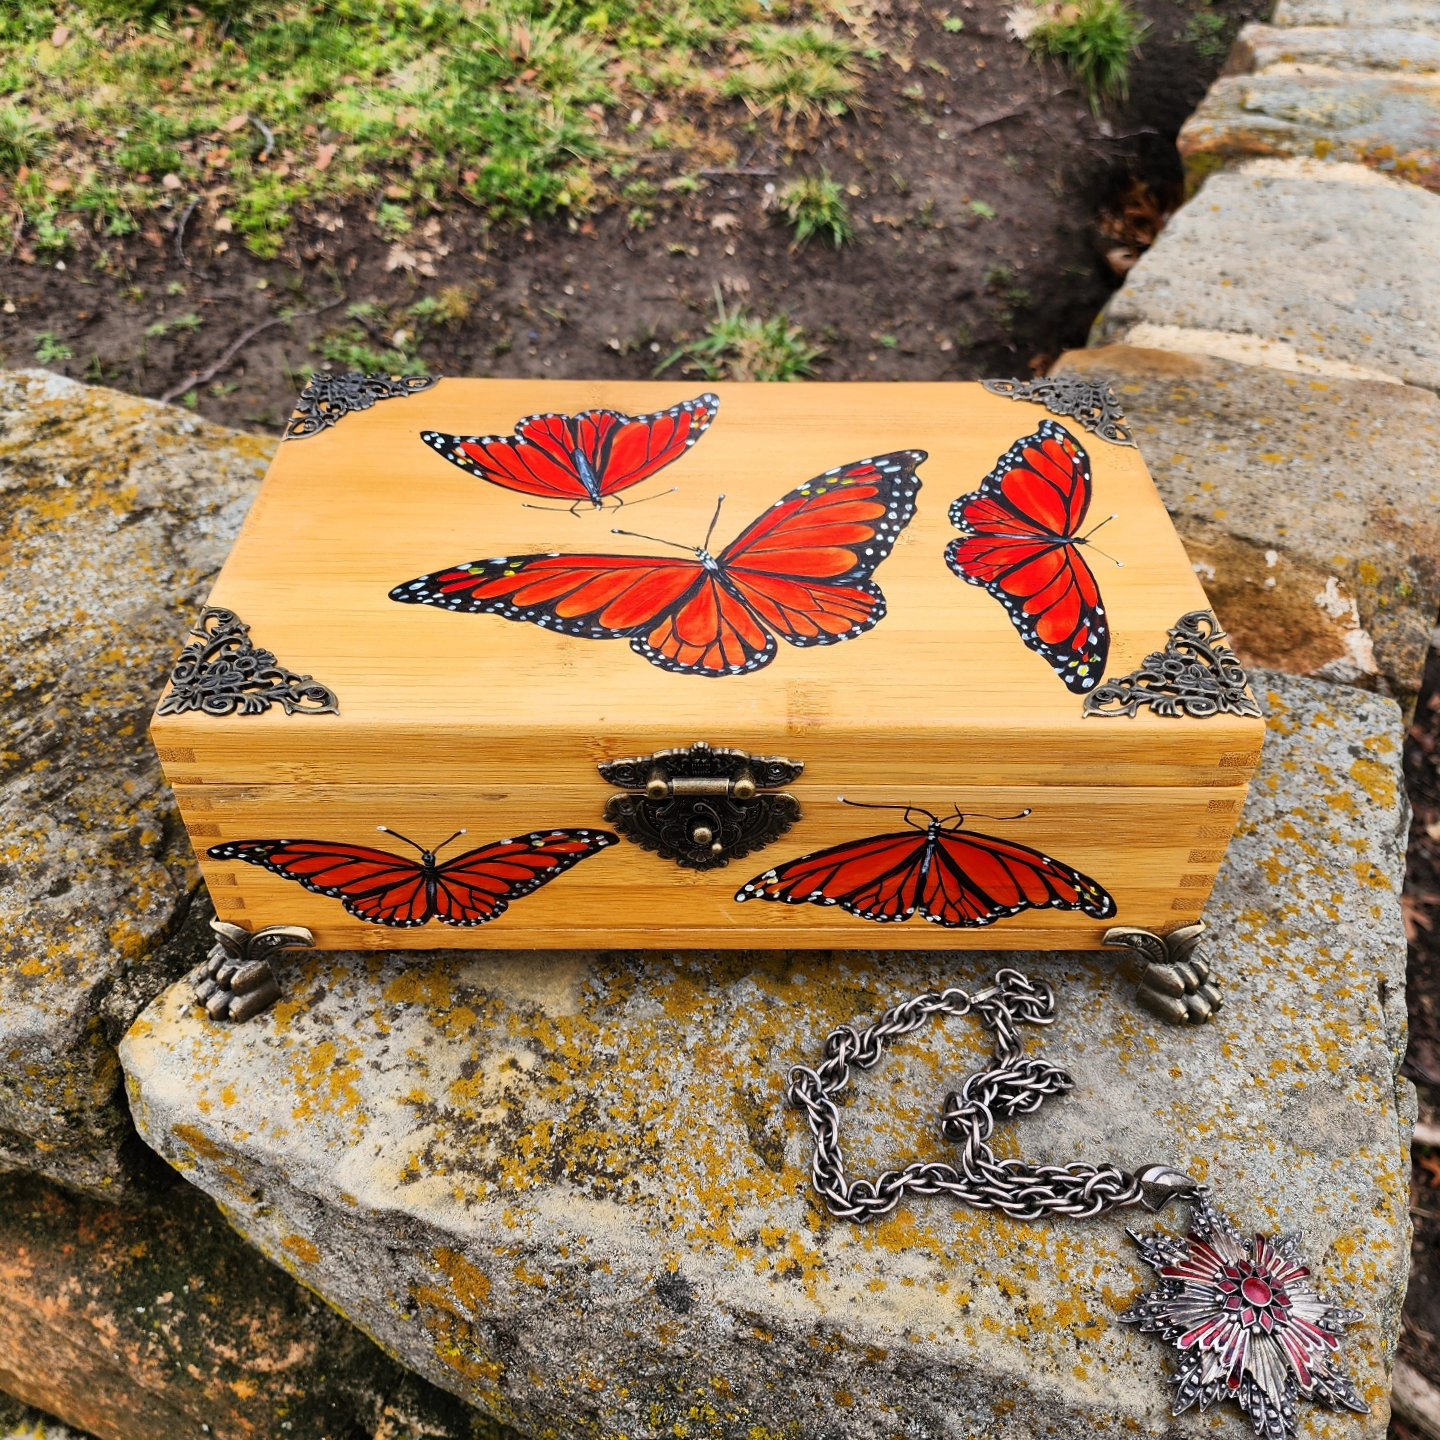 Antique bamboo box repurposed into a trinket/jewelry box with design of some monarch butterflies. Bronze plated clasps and corner decorations added with brass feet.